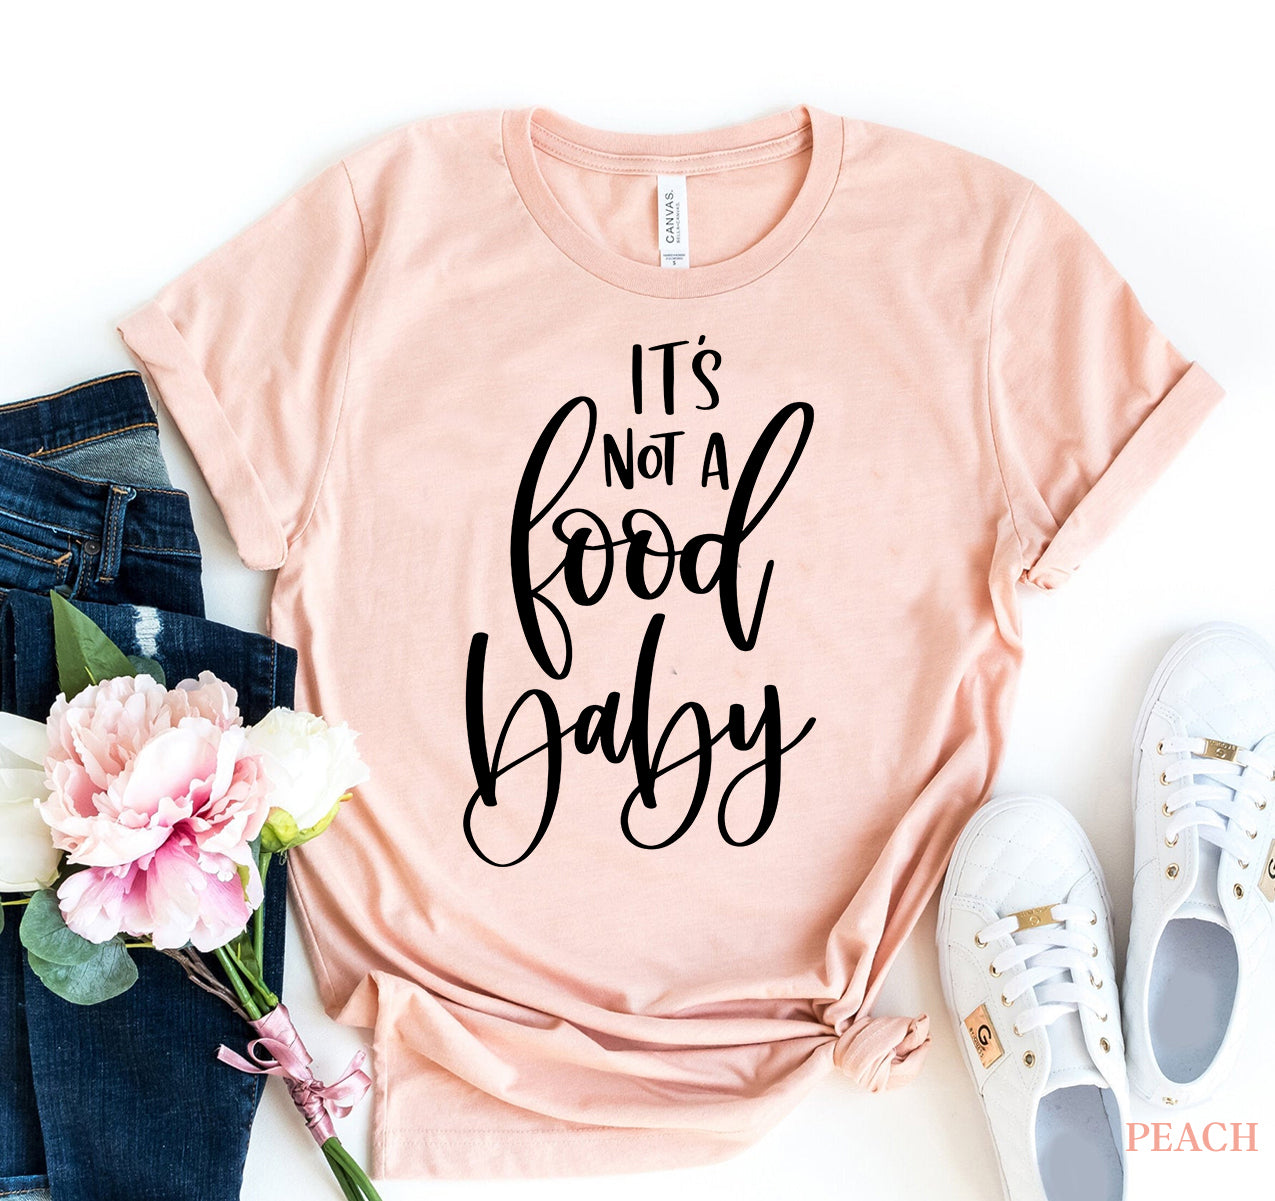 It's not a food baby T-shirt | Agate